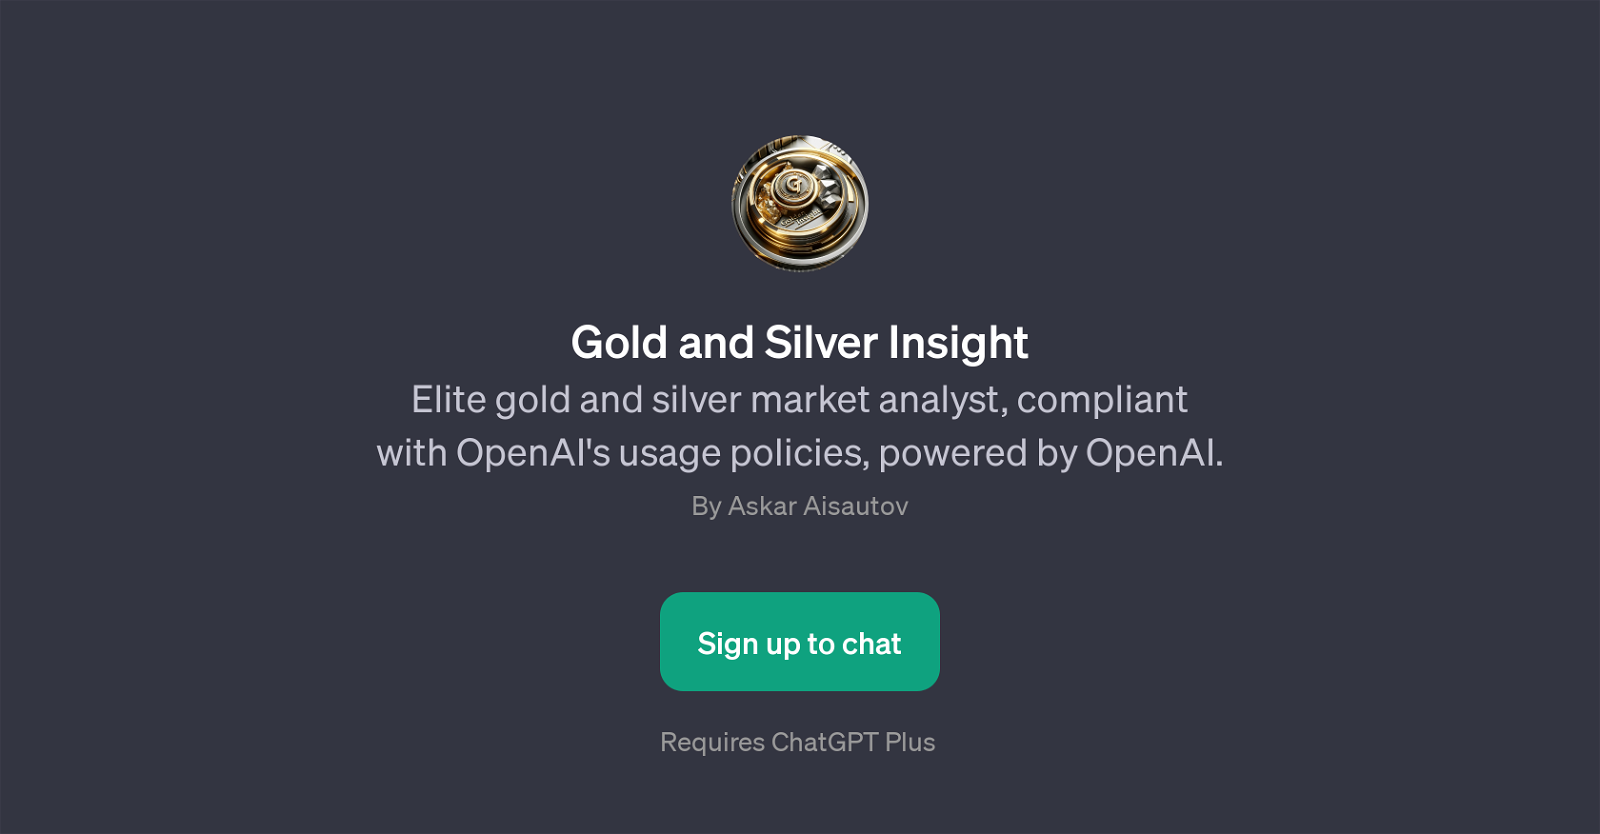 Gold and Silver Insight website